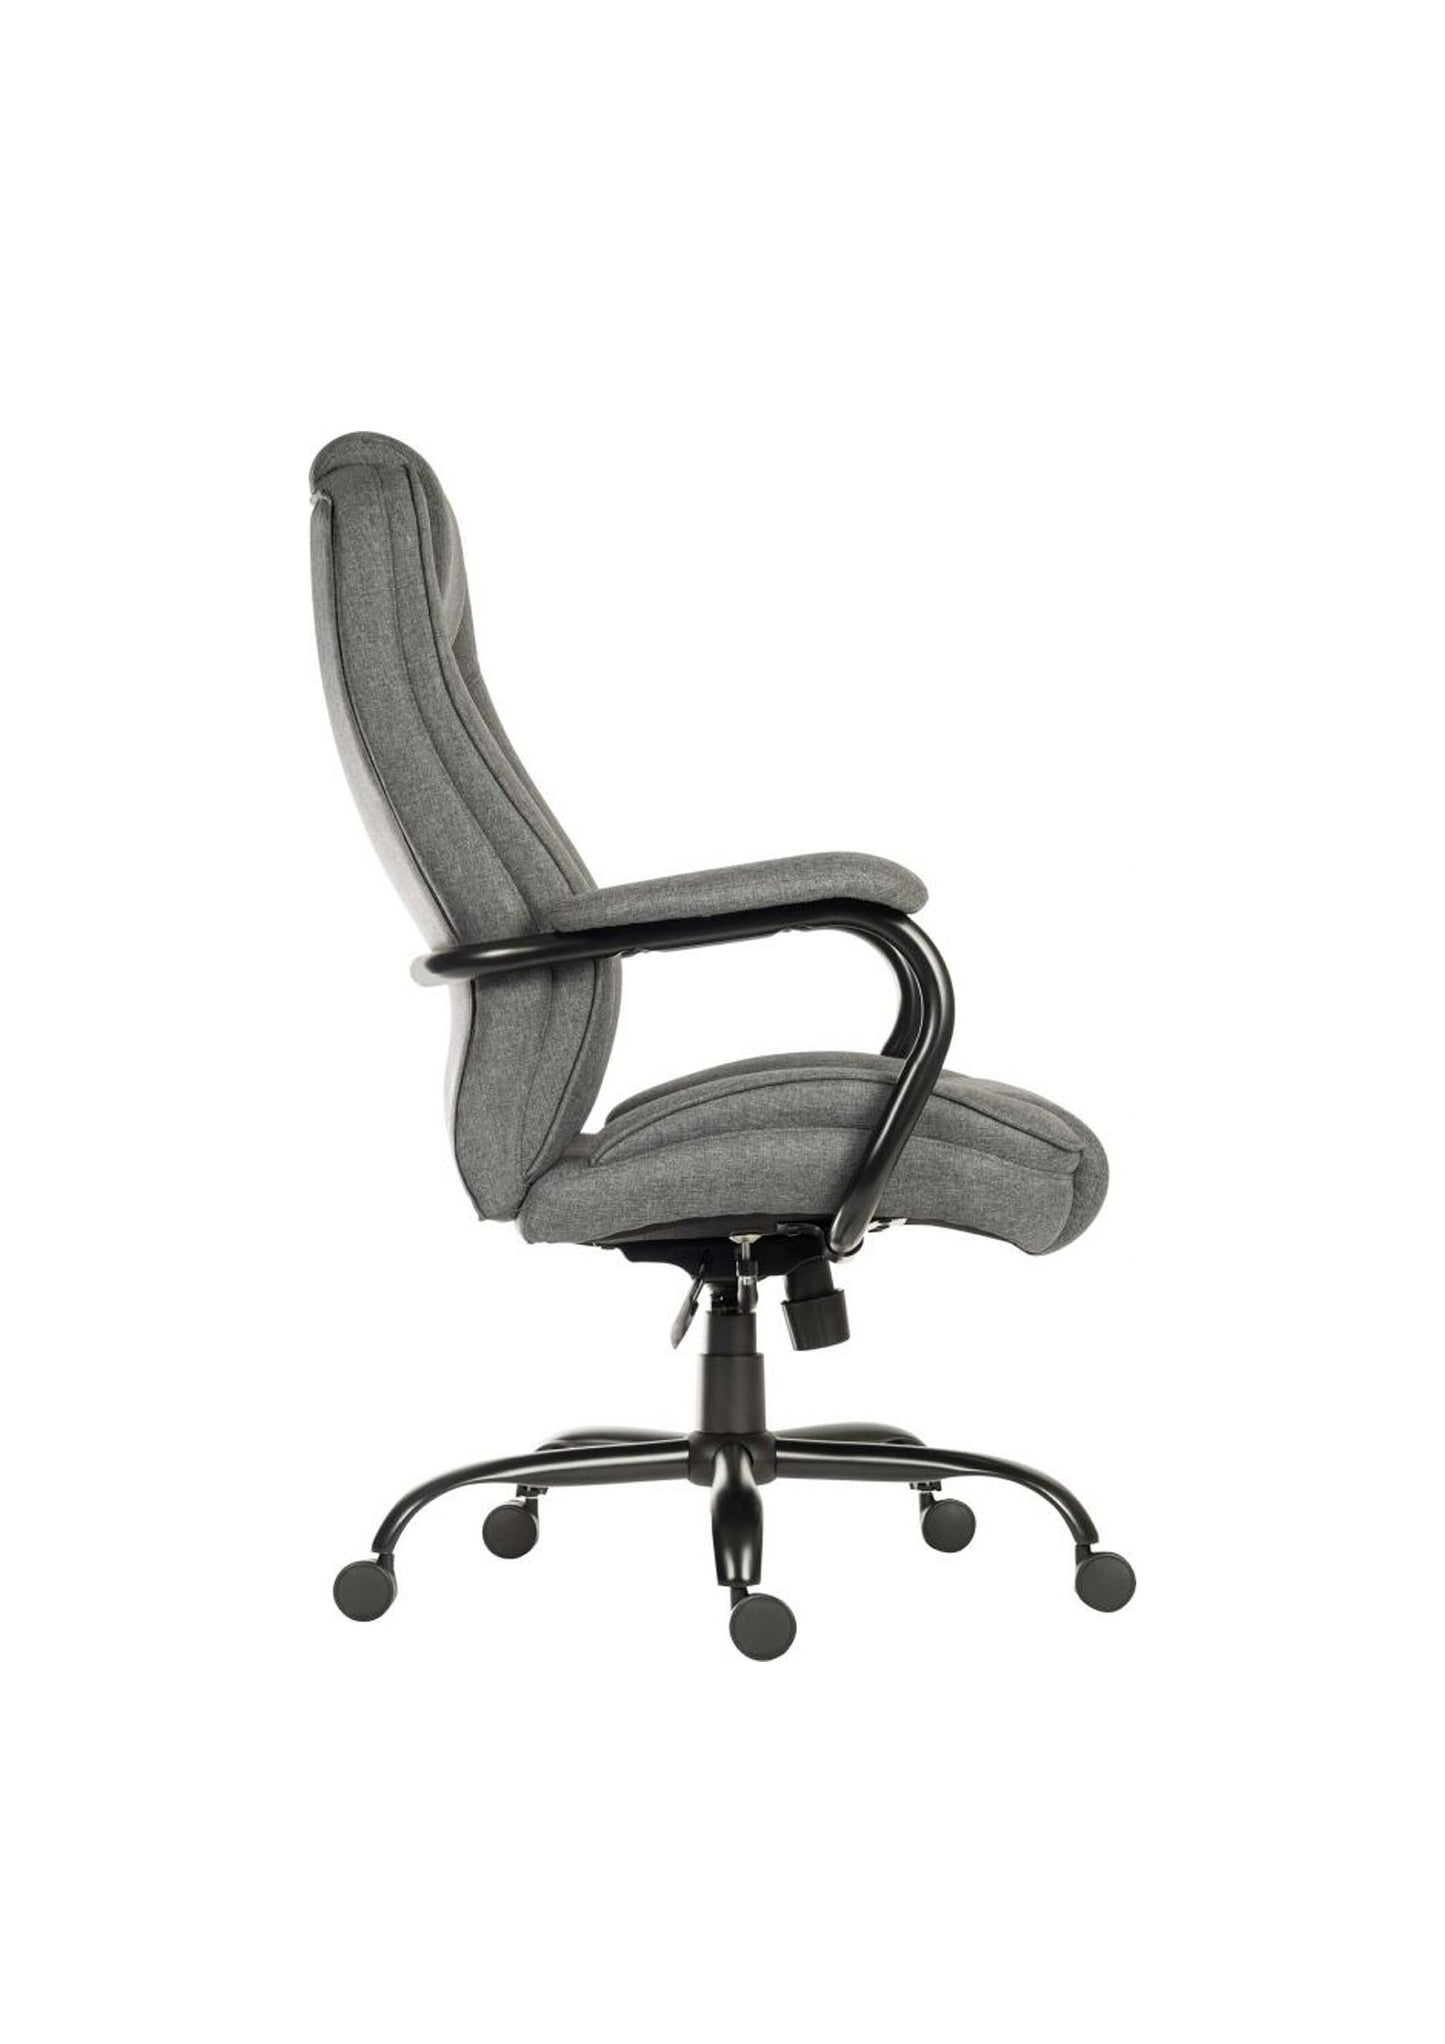 NEW Designer Executive adjustable swivel office/desk chair grey fabric Reclining function with tilt tension